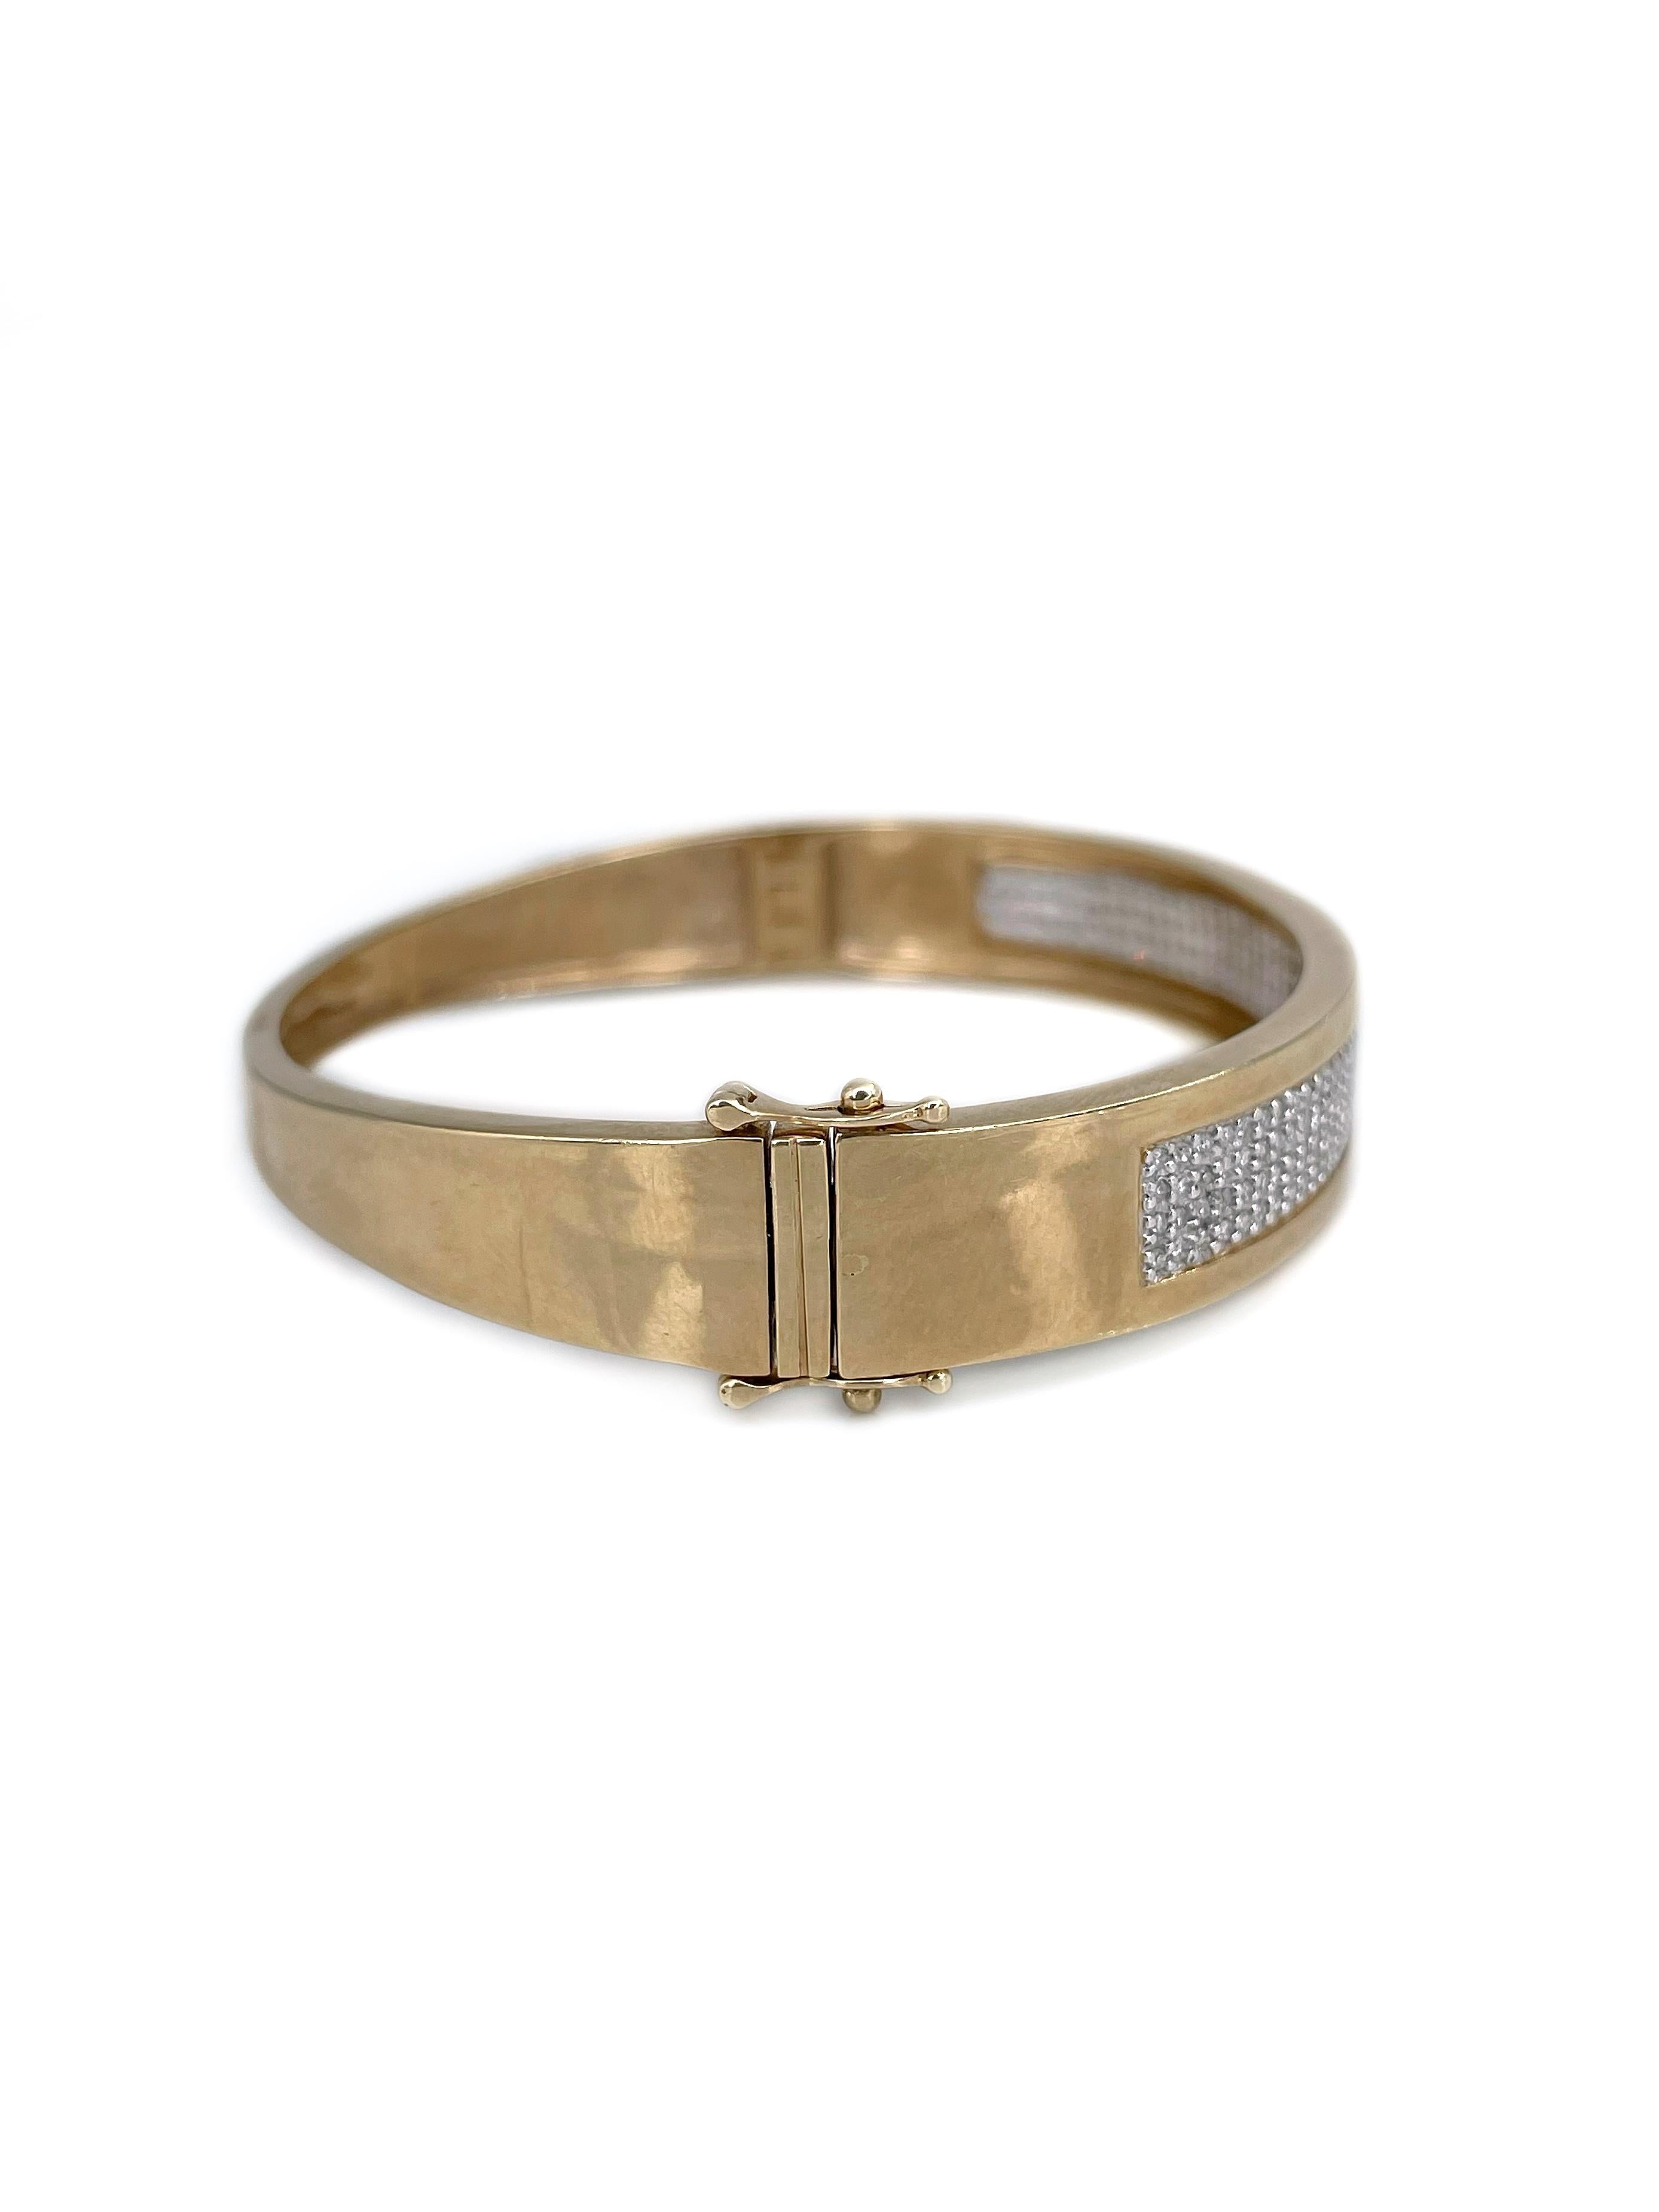 This is a classic design hinged bangle bracelet crafted in 18K yellow gold. Circa 1990. 

The piece features 200 diamonds: 17 facet, TW 0.70ct, RW-STW, SI-P1.

Weight: 22.22g
Inner circumference: 17cm
Width (max): 1cm

———

If you have any